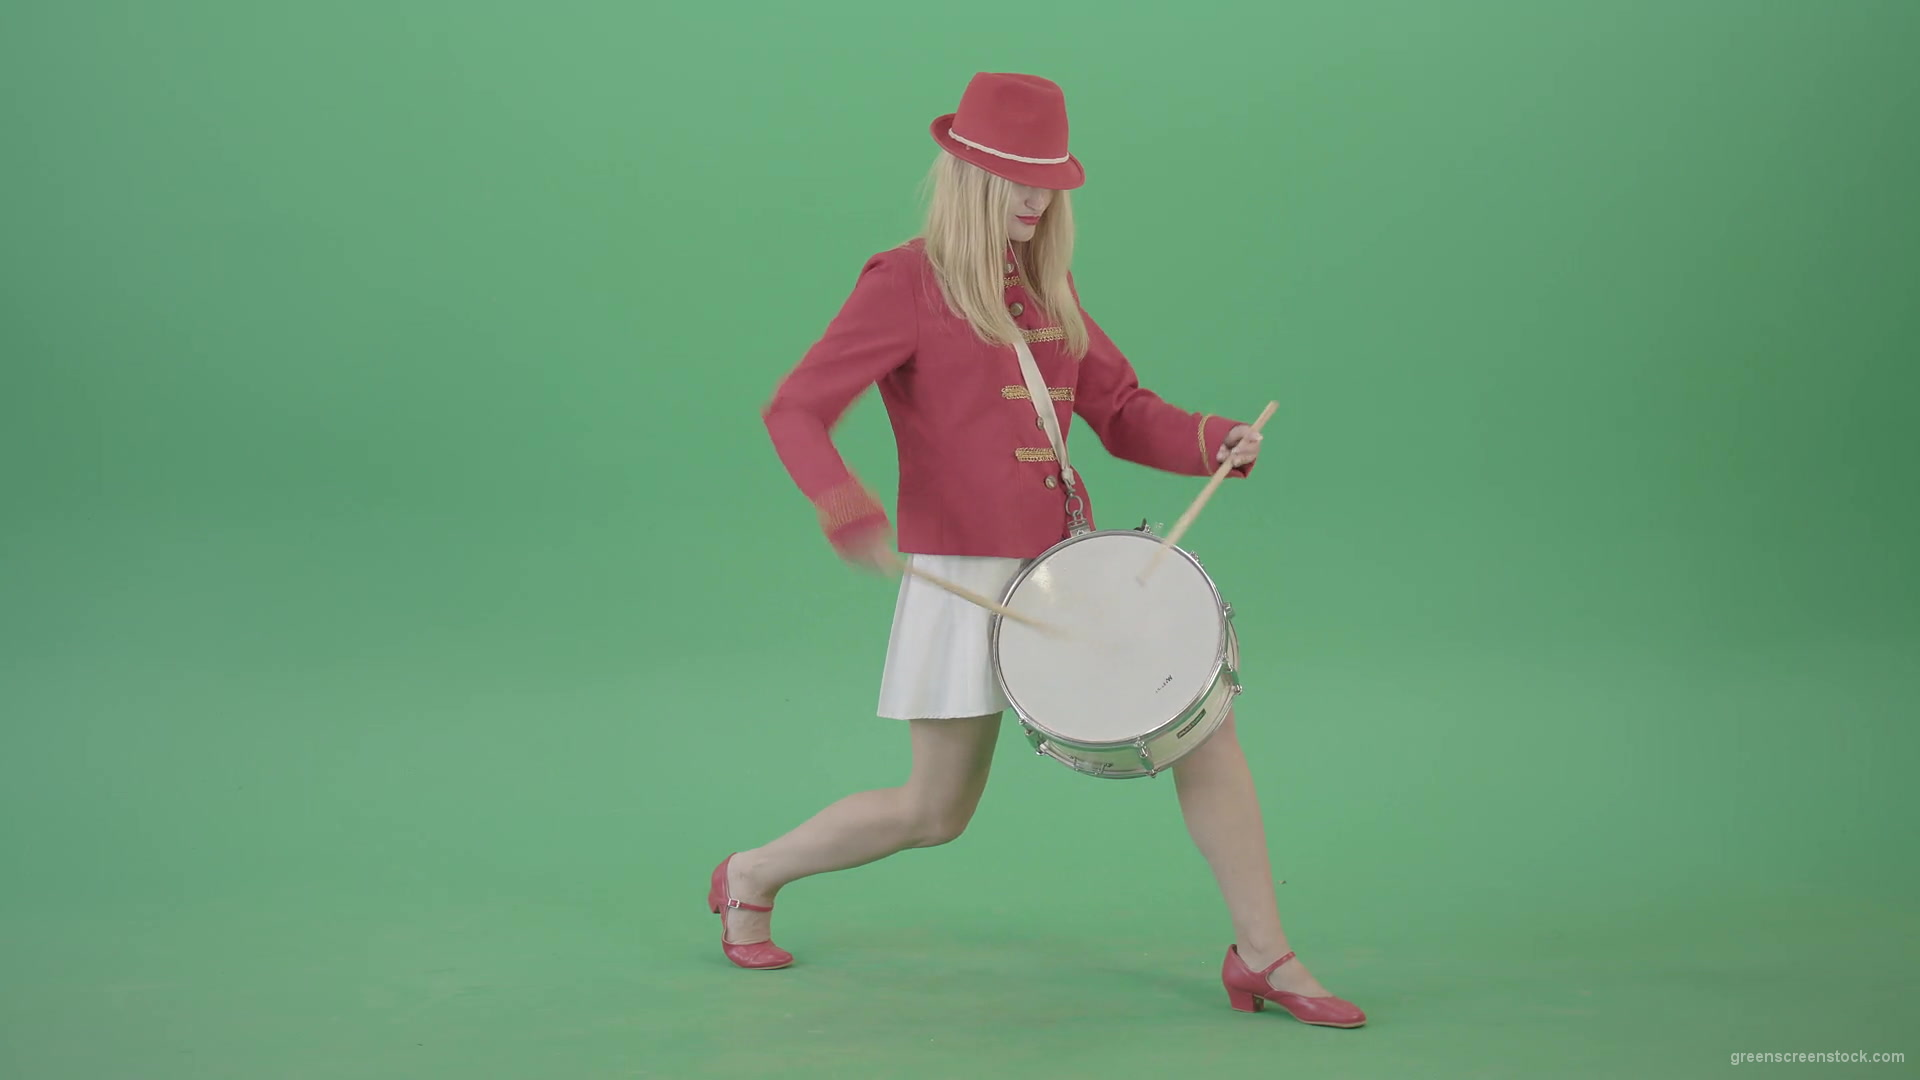 Blonde-Girl-in-Red-Uniform-making-beats-on-music-drum-instrument-in-active-pose-on-green-screen-4K-Video-Footage-1920_007 Green Screen Stock